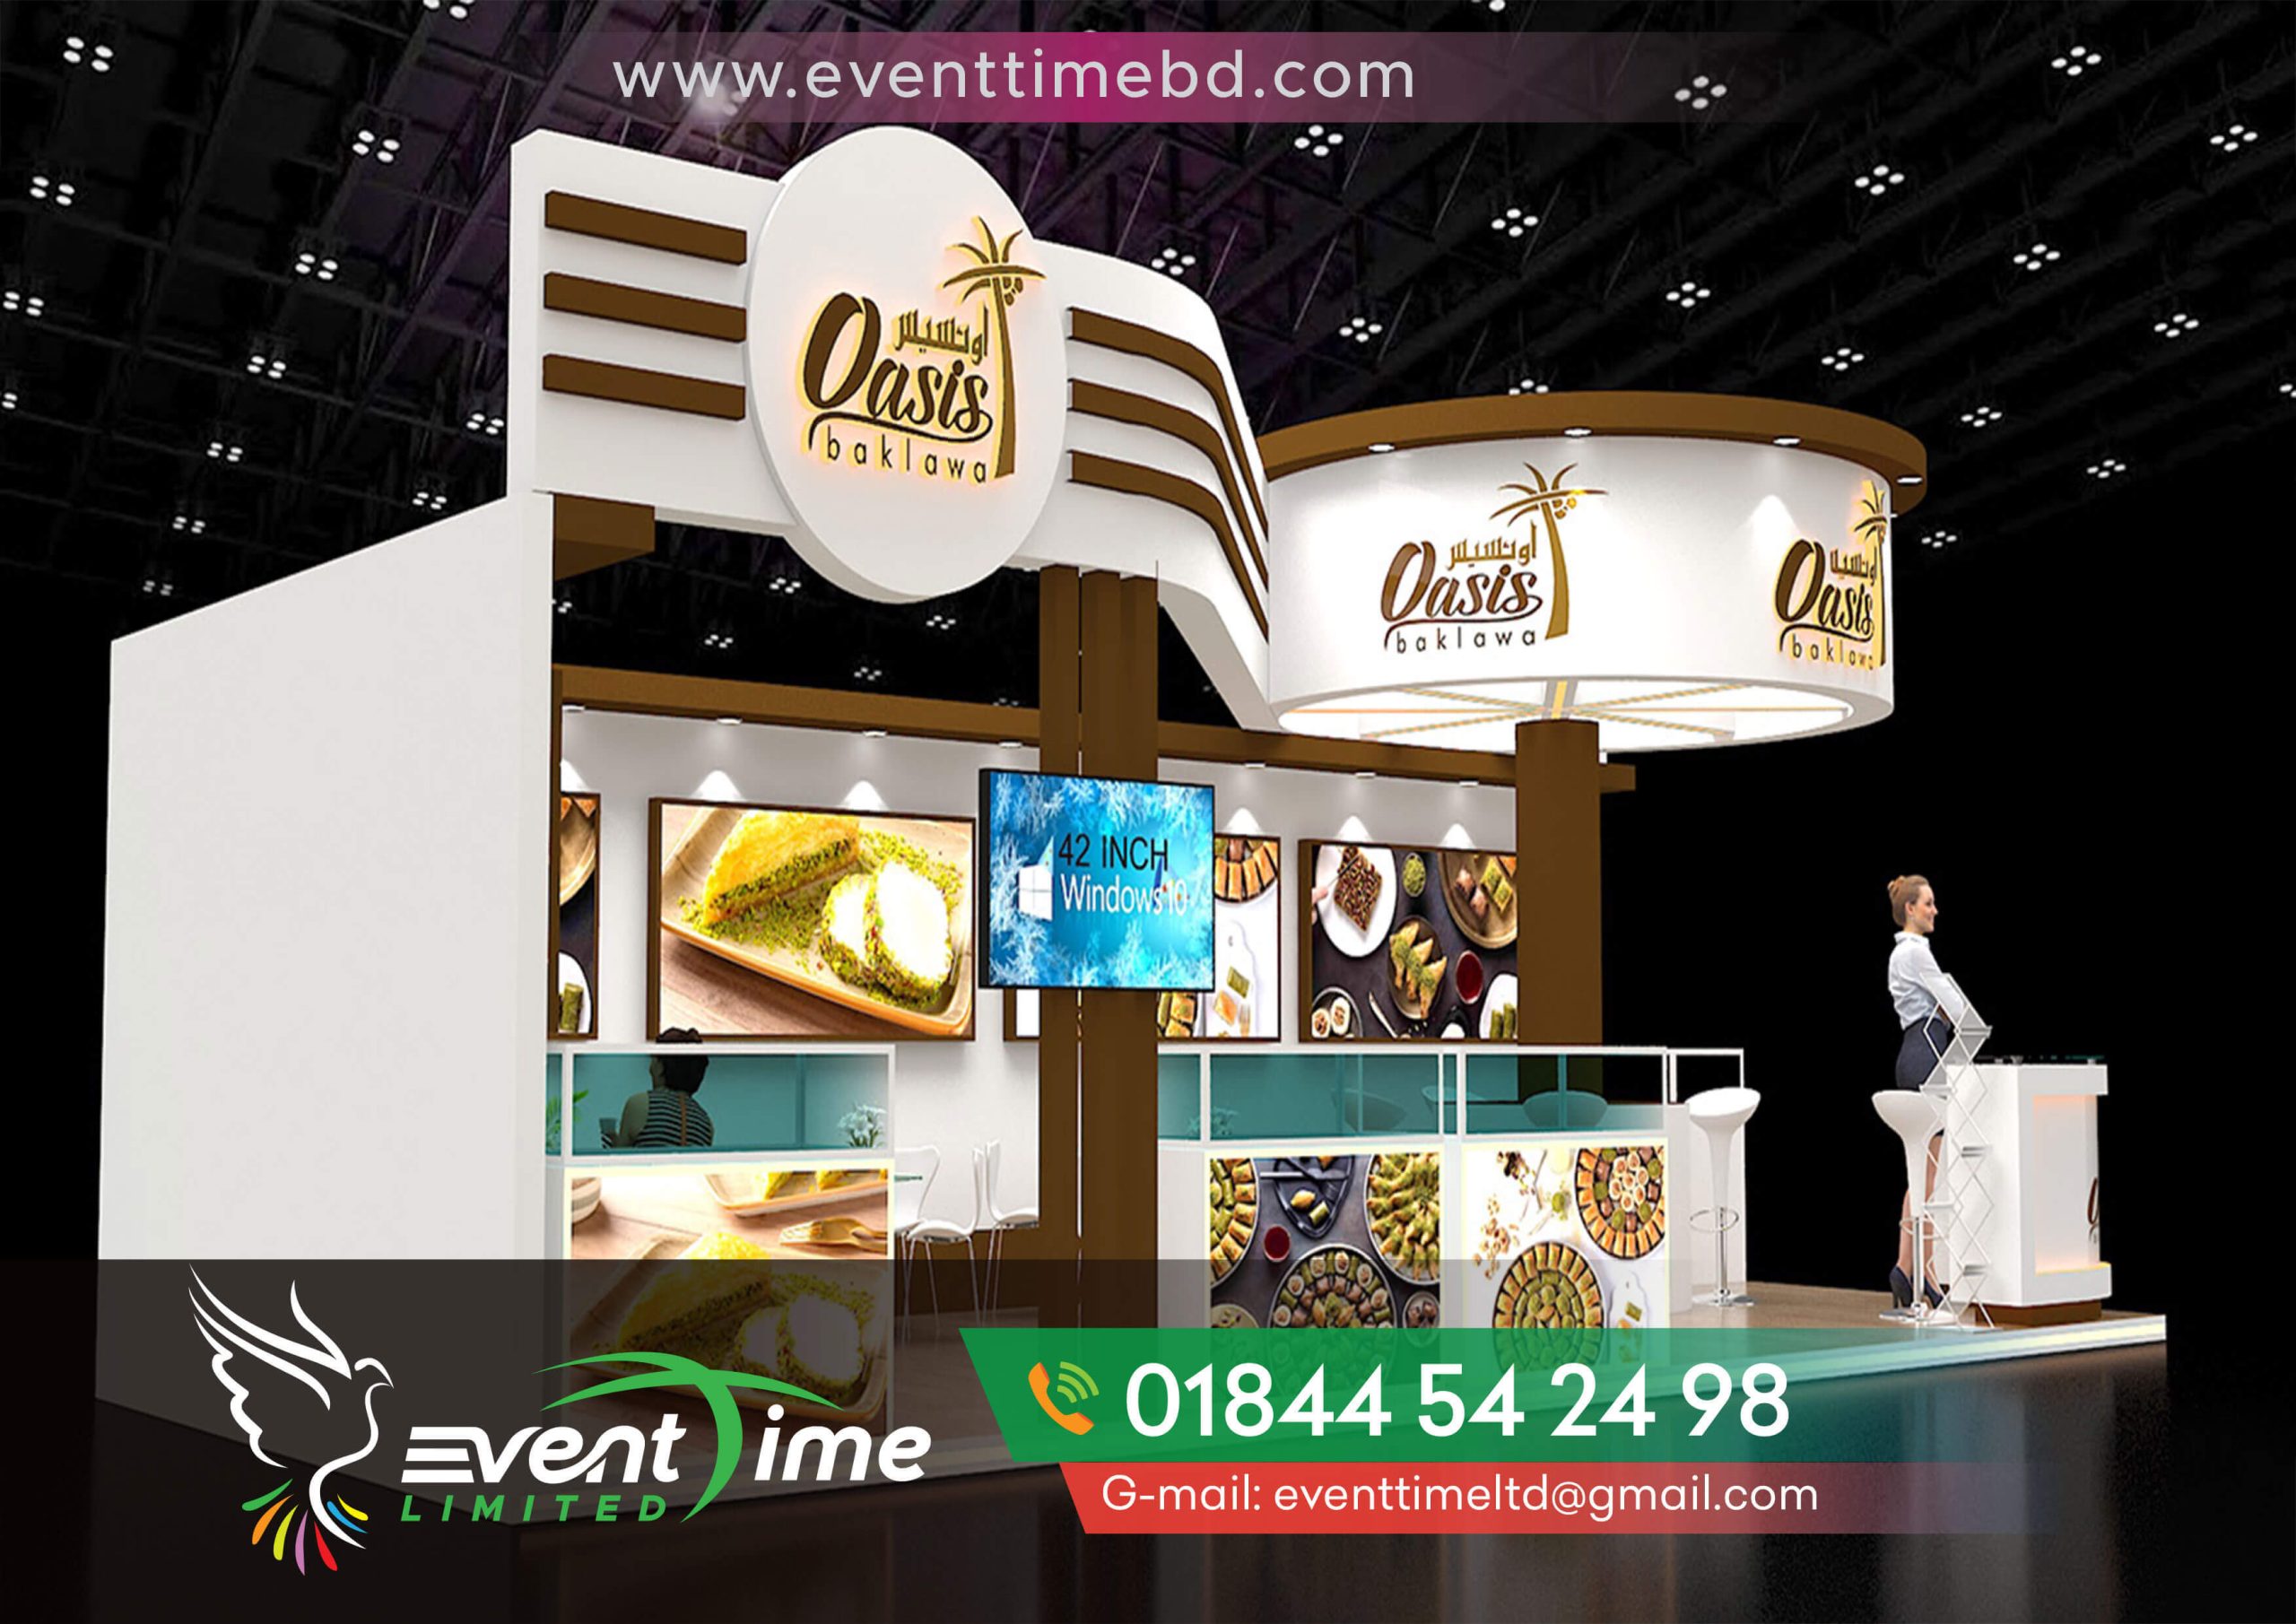 Best exhibition booth fabrication company in bangladesh price. best booth design company in bangladesh. global event & interiors. Best exhibition booth fabrication company in bangladesh price near. Best exhibition booth fabrication company in bangladesh price list. best booth design company in bangladesh. global event & interiors. event management in bangladesh. event management course in bangladesh. ananta events and entertainment. artcell booking price. Global event & interiors reviews. Global event & interiors photos. Best booth design company in bangladesh price. Best booth design company in bangladesh for exhibition. best exhibition booth fabrication company in bangladesh. global event & interiors. event management in bangladesh. international trade fairs and exhibitions 2023. list of trade shows by industry 2023. trade show events examples. trade show marketing examples. trade fair and exhibition. trade show directory. trade fairs and exhibitions business ideas. trade shows 2023. international trade fairs and exhibitions 2023 europe. International trade fairs and exhibitions 2023 usa. International trade fairs and exhibitions 2023 dates. largest trade shows in europe 2023. trade fair 2023 dates. largest trade shows in the world. biggest expo in the world. trade fair dates. trade fair in bangladesh 2023. International trade fairs and exhibitions 2023 in bangladesh location. International trade fairs and exhibitions 2023 in bangladesh date. dhaka international trade fair 2023 stall list. bangladesh textile exhibition 2023. trade fair bangladesh. upcoming events in bangladesh 2023. trade fair paragraph. List of trade shows by industry 2023 usa. List of trade shows by industry 2023 california. wholesale trade shows 2023. manufacturing trade shows 2023. retail trade shows 2023. manufacturing trade shows 2023 usa. trade shows 2023 near me. construction trade shows 2023. Wholesale trade shows 2023 usa. Wholesale trade shows 2023 nyc. Wholesale trade shows 2023 near me. Best wholesale trade shows 2023. boutique trade shows 2023. wholesale trade show near me. retail trade shows 2023. wholesale home decor trade show. Trade Shows in Bangladesh - Expos, Trade Fairs & Exhibitions. Upcoming Trade Fairs in Bangladesh (2023- 2024). Trade Shows Worldwide - Bangladesh - 2023/2024. 33 Trade Fairs in Bangladesh from August 2023. Trade Fairs in Bangladesh. Upcoming Exhibitions, Trade Show in Bangladesh. List Of All Upcoming Expo 2023 Events In Dhaka. 33 Trade Fairs in Bangladesh from August 2023. International Trade Show Organizer in Bangladesh. Upcoming Exhibitions, Trade Show in Bangladesh. international trade fair bangladesh 2023. dhaka international trade fair 2023. dhaka international trade fair location. dhaka international trade fair 2023 stall list. dhaka international trade fair 2023 online ticket. dhaka international trade fair 2023 date. trade fair paragraph. dhaka international trade fair paragraph. stall designing. exhibition stall design. 3d stall design. exhibition stall. fair stall design. 3d stall. octonorm stall. octanorm stall. 2 side open stall design. simple stall design. one side open stall design. stall fabrication. 3 side open exhibition stall design. 3 side open stall design. exhibition stall design and fabrication. expo stall design. stall exhibition. exhibition stall price. 4 side open stall design. 2 side open exhibition stall design. 1 side open stall design. exhibition stall fabrication. stall design and fabrication. creative stall design. jewellery exhibition stall design. stall design 2 side open. 3 side open stall. one side open exhibition stall design. shell scheme stall. portable exhibition stall. stall design 3 side open. 1 side open exhibition stall design. trade fair stall. best stall design. 3x3 stall design. fabricated stall. octanorm exhibition stall. 3 side open exhibition stand design. food exhibition stall design. stall booth design. 3d exhibition stall. 4 side open exhibition stall design. portable stall design. 3d exhibition stall design. 2 side open stall. creative exhibition stall design. 3 side open booth design. fabrication stall design. octonorm stall design. booth stall design. exhibition stall design company. simple exhibition stall design. food stall in exhibition. property exhibition stall design. unique stall design. 3d exhibition stand design. garment exhibition stall design. trade fair stall design. international exhibition stall design. gulfood stall cost. stall design one side open. 2 side open exhibition stall. open stall design. real estate stall design. food stall exhibition. one side open stall. best exhibition stall design. stall design company. jewellery exhibition stall. exhibition stall fabrication services. cphi stall design. modular exhibition stall. international stall design. small exhibition stall design. exhibition food stall. food exhibition stall. 3 side open exhibition stall. exhibition stall 3d. designing stall. exhibition stall designing services. exhibition stall design and fabrication company. 3d max stall design. 6x6 stall design. exhibition stall design 2 side open. modern exhibition stall design. elecrama stall design. 10x10 stall design. small exhibition stall. stall fabrication services. one side open exhibition stall. octanorm stall design. 2 side open exhibition stand design. readymade exhibition stalls. outdoor exhibition stall design. design for exhibition stall. exhibition stall display. real estate exhibition stall design. international exhibition stall. trade fair. trade fair 2023. international trade fair 2023. international trade fair. iffa 2022. trade fair 2022. international trade fair 2022. international fair 2022. furniture fair 2022. china import and export fair. trade fair international. canton fair china 2023. chinaplas 2023. heimtextil 2023. aahar 2022. texworld paris. anuga. texworld paris 2023. seafood expo global 2023. international fairs. k show 2022. anuga 2023. domotex 2023. heimtextil 2022. embedded world 2023. bauma 2023. gifa 2023. nuremberg toy fair 2023. trade shows near me. ispo 2023. ifat munich 2022. nuremberg toy fair. magic trade show. trade expo. jewellery fair. seafood expo global. trade fair near me. asd trade show. drupa 2024. drupa 2022. chinaplas 2022. texworld paris 2022. mega trade fair. seafood expo global 2022. automechanika shanghai. automechanika 2023. ambiente fair. medica trade fair. medica fair. international trade fairs and exhibitions 2022. thaifex anuga 2022. furniture show. international woodworking fair. fashion trade shows. bauma exhibition. world trade fair. beautyworld middle east 2022. jrc conventions & trade fairs. canton fair october 2022. science city trade fair. medica exhibition. virtual trade show. trade fairs and exhibitions. ambiente fair 2023. nec toy fair. hannover fair 2022. trade show calendar. trade fair 2021. toy fair nuremberg 2023. fortune trade fairs. trade show stands. tceq trade fair. science city trade fair 2022. automechanika shanghai 2022. emo hannover 2022. trade show exhibit. k trade fair. nuremberg toy fair 2022. ifat exhibition. expo riva schuh 2022. techtextil 2023. paperworld 2022. construction trade shows. trade show exhibit companies. exhibition fair. ifa fair. bauma expo 2023. coterie trade show. international mega trade fair. milan furniture show 2022. packaging exhibition. autumn fair nec. milano furniture fair 2022. china import and export fair 2022. 2022 canton fair october autumn. thaifex anuga asia. lagos international trade fair. largest trade shows in the world. frankfurt ambiente 2023. travel trade shows. the canton fair. furniture trade shows 2022. textile trade shows 2022. medica exhibition 2022. international dental show 2023. frankfurt ambiente. bauma trade show. retail trade shows. international woodworking fair 2022. msme expo 2022. world trade fair 2022. virtual trade show platform. upcoming trade shows. trade show equipment. international furniture fair. ish fair. beauty trade shows. international woodworking fair 2023. medica fair 2022. medica trade show. medica trade fair 2022. milano furniture fair. anuga exhibition 2022. canton fair 2022 october. bauma exhibition 2023. automechanika shanghai 2023. international trade shows. canton fair april 2023. international furniture fair 2022. texworld 2023. bauma fair 2022. mega trade fair science city. anuga tech 2022. furniture show 2022. iffa show 2022. ambiente trade show. trade fair exhibition. trade shows and exhibitions. furniture fair milan 2022. b2b trade shows. ifat eurasia 2023. anuga fair. ibc trade show. aahar trade fair 2022. tradefairs. milano furniture fair 2023. virtual trade fair. ecommerce trade shows. furniture trade shows. autumn fair 2023. micam fair 2022. houseware show 2022. ambiente exhibition. international trade fair 2021. fairs and exhibitions. medical trade shows. trade fair business days. toy fair 2021. fabric trade shows. texworld 2022. k trade fair 2022. international trade fairs and exhibitions 2023. ifat exhibition 2022. anuga exhibition 2023. trade shows and conventions. anuga 2019. machinery exhibition. ispo fair. industry trade shows. revolver trade show. canton trade fair. grand trade fair. trade fair mela. jewelry trade shows. tradefair 2022. technology trade shows. online trade shows. tech trade shows. national trade fair 2022. iffa 2019. cosmetic exhibition. business trade shows. textile trade shows. houseware show. expo trade show. agri trade fair 2022. anuga fair 2022. bau fair. apparel trade shows. zak trade fairs. drupa exhibition. ispo trade show. machinery exhibition 2022. international handicraft exhibition 2022. 2022 trade fair. micam fair. product fair. futurex trade. trade fair booth. index trade fair. industry fair. ifat fair. mega trade fair 2022. beauty fairs. moda trade show. aahar exhibition 2022. laser world of photonics 2022. anuga 2021. mets trade show. lagos international trade fair 2022. manufacturing trade shows. ise trade show. hospitality trade shows. packaging trade shows. ifa trade show. nec trade shows. indiatradefair com. restaurant trade shows. automotive trade shows. interplastica 2022. iffa exhibition. anuga tech. nec trade fair 2022. anuga exhibition. apex trade show. pet trade show. glee trade show. ift trade show. toy fair nuremberg 2022. local trade shows. trade fair stand. scoop trade show.